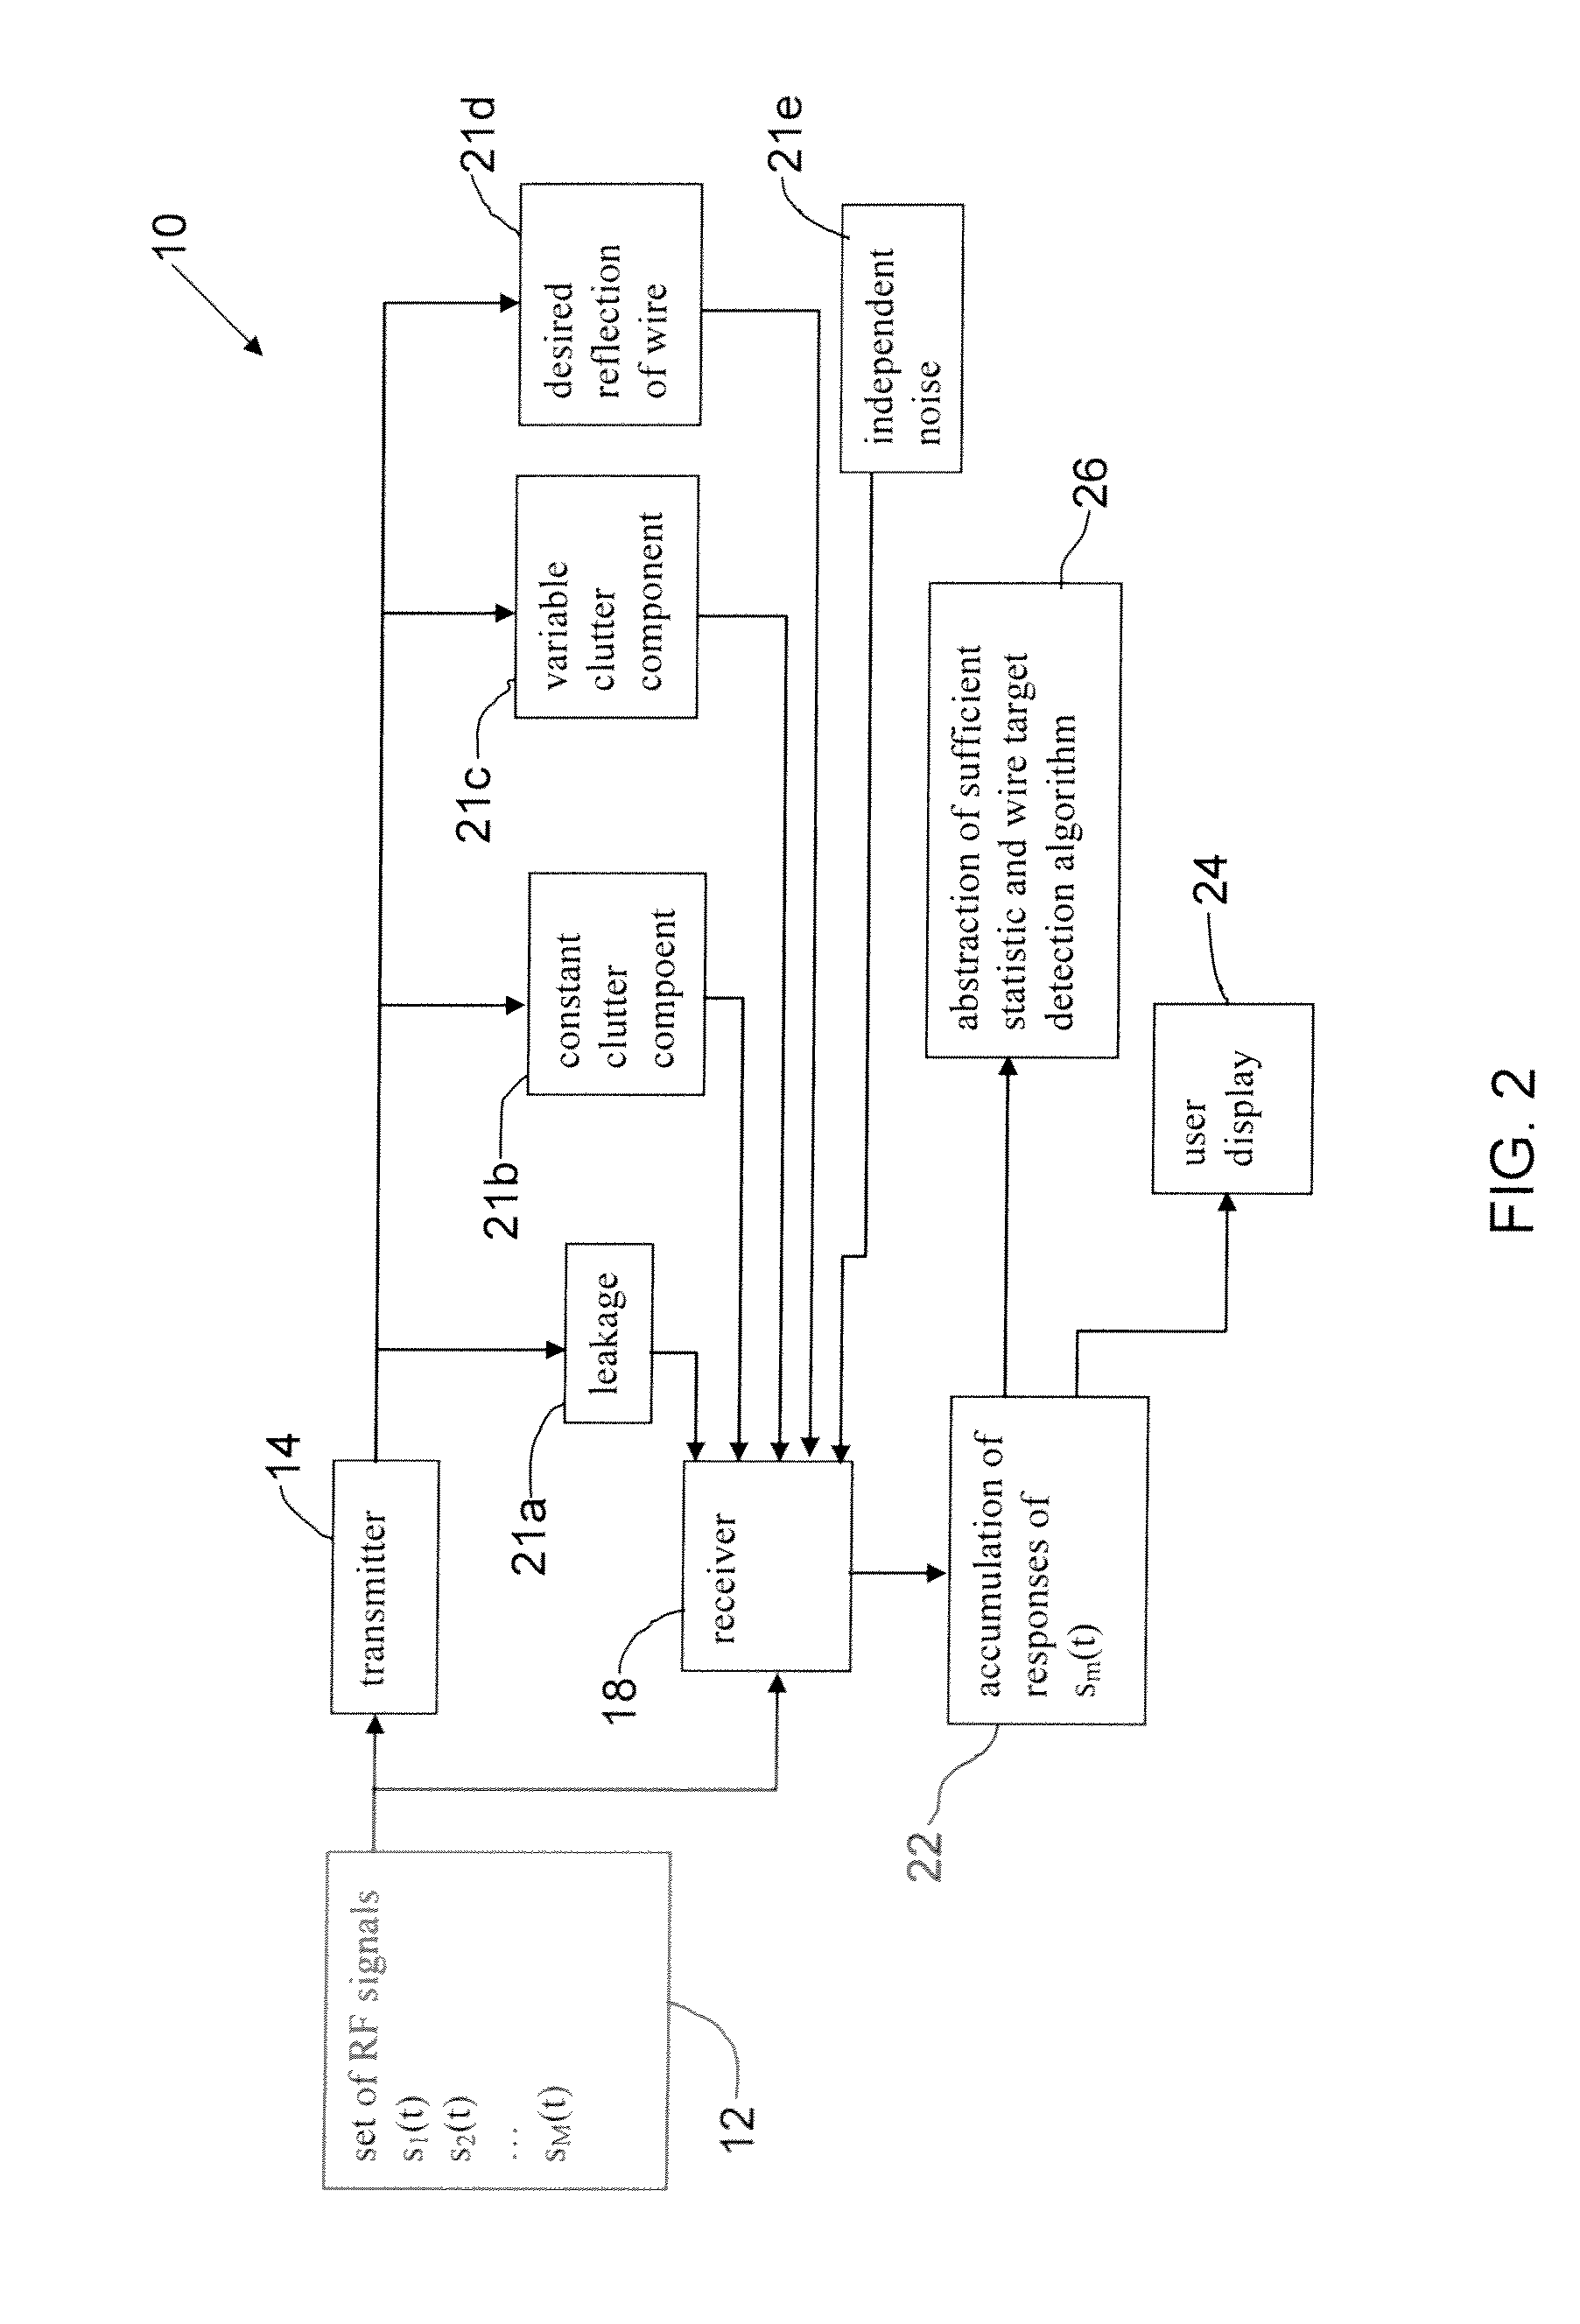 Systems, Methods and Apparatuses for Remote Device Detection